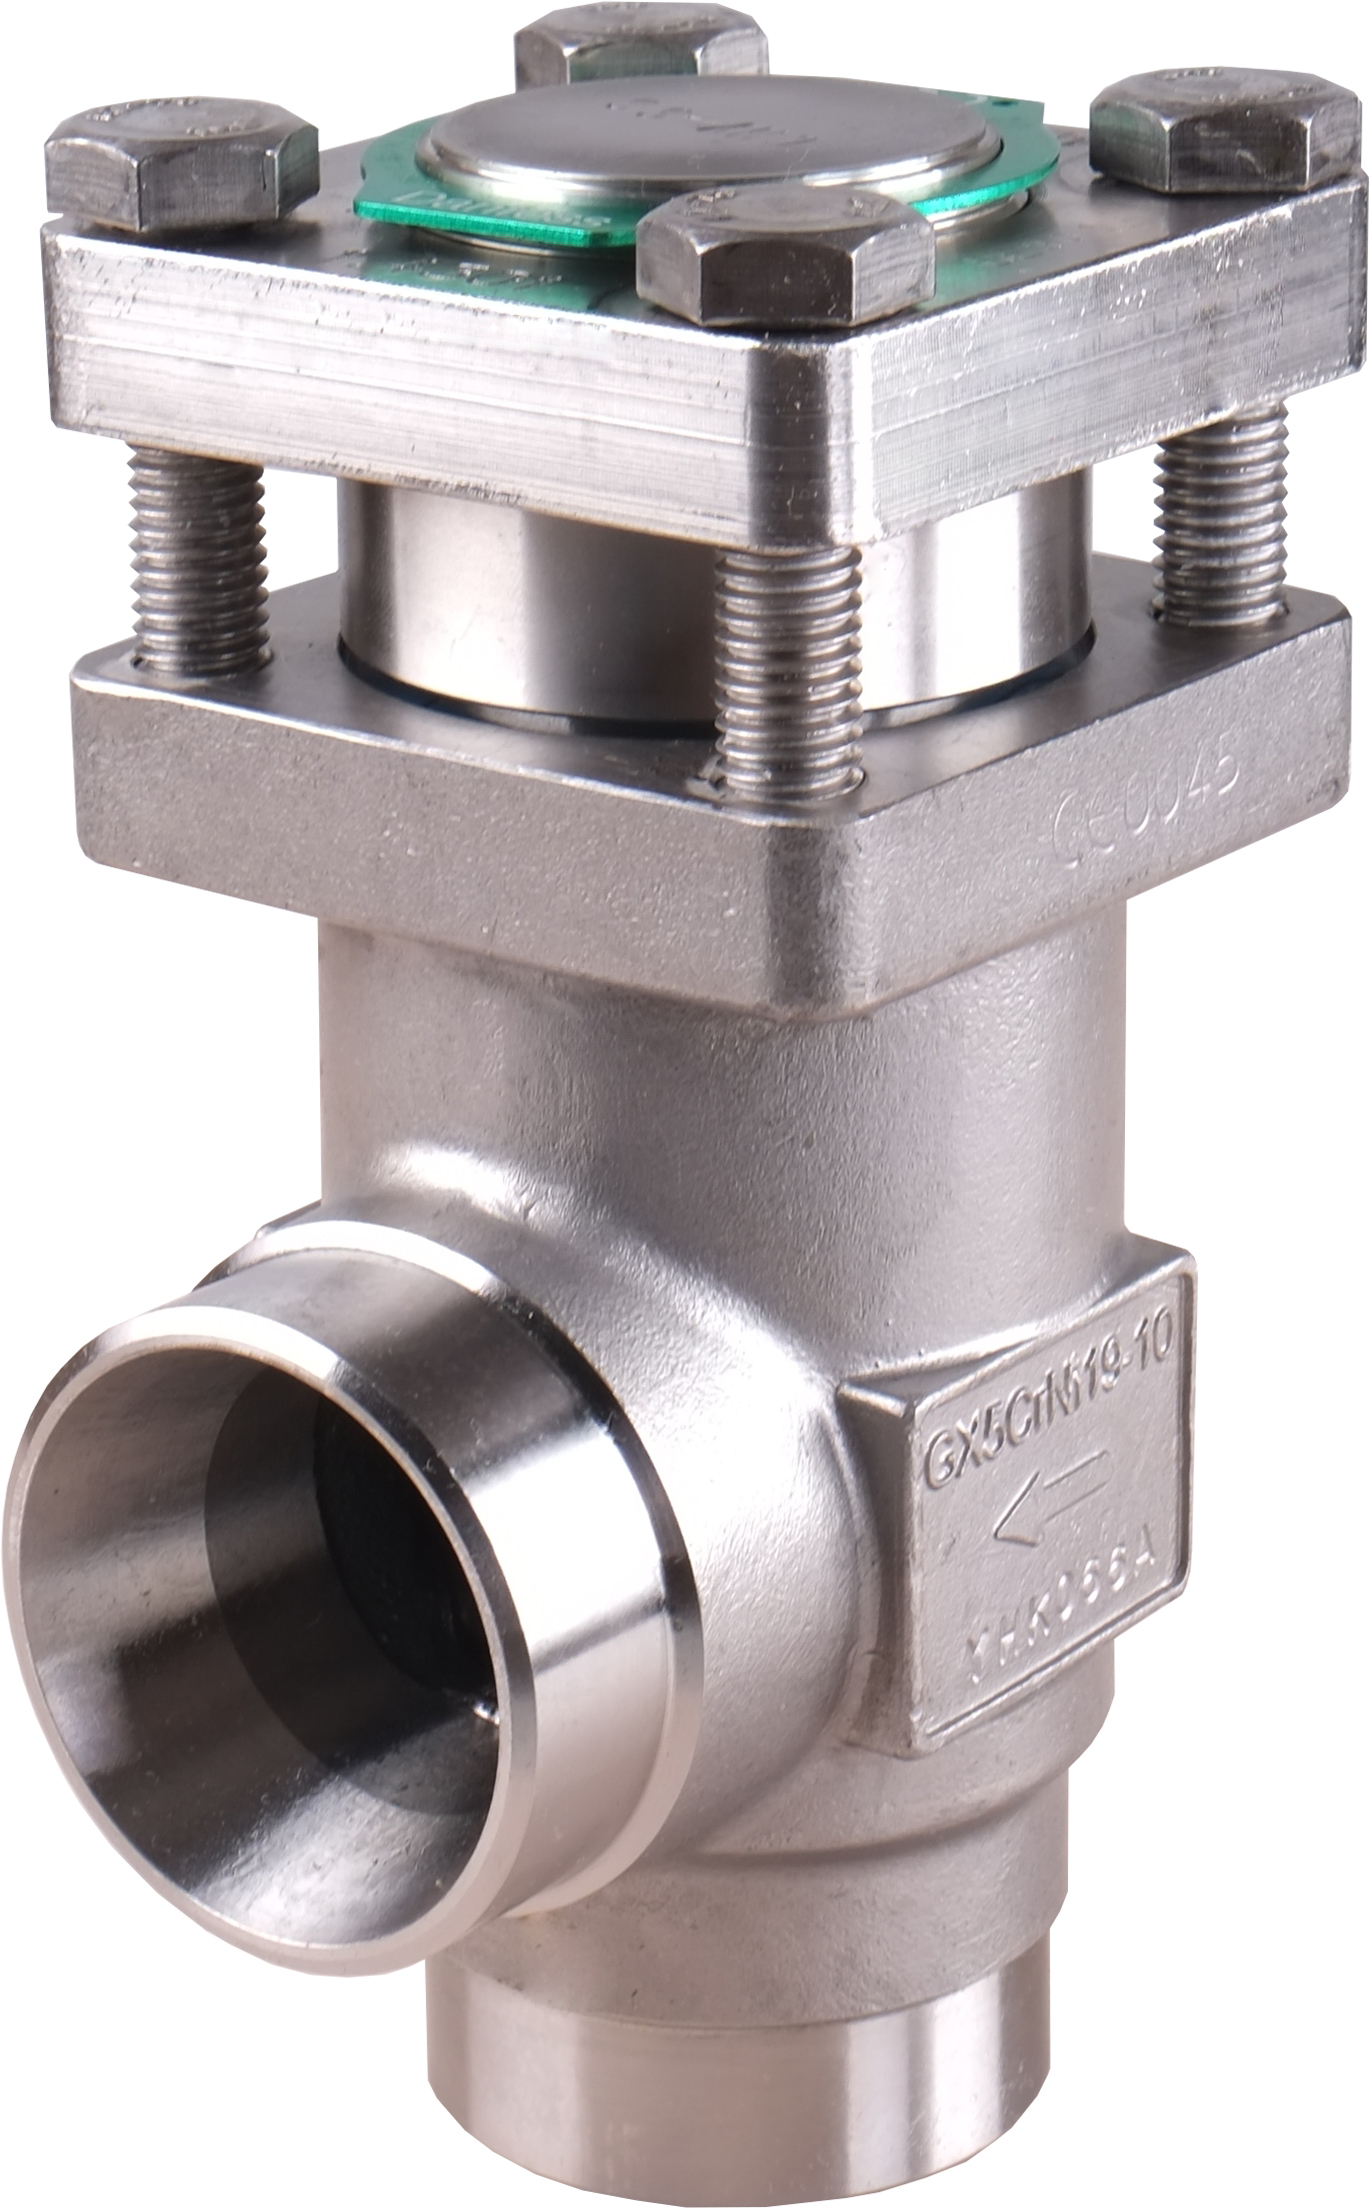 Check valve, CHV-X SS 32, Direction: Angleway, Connection standard: EN 10220